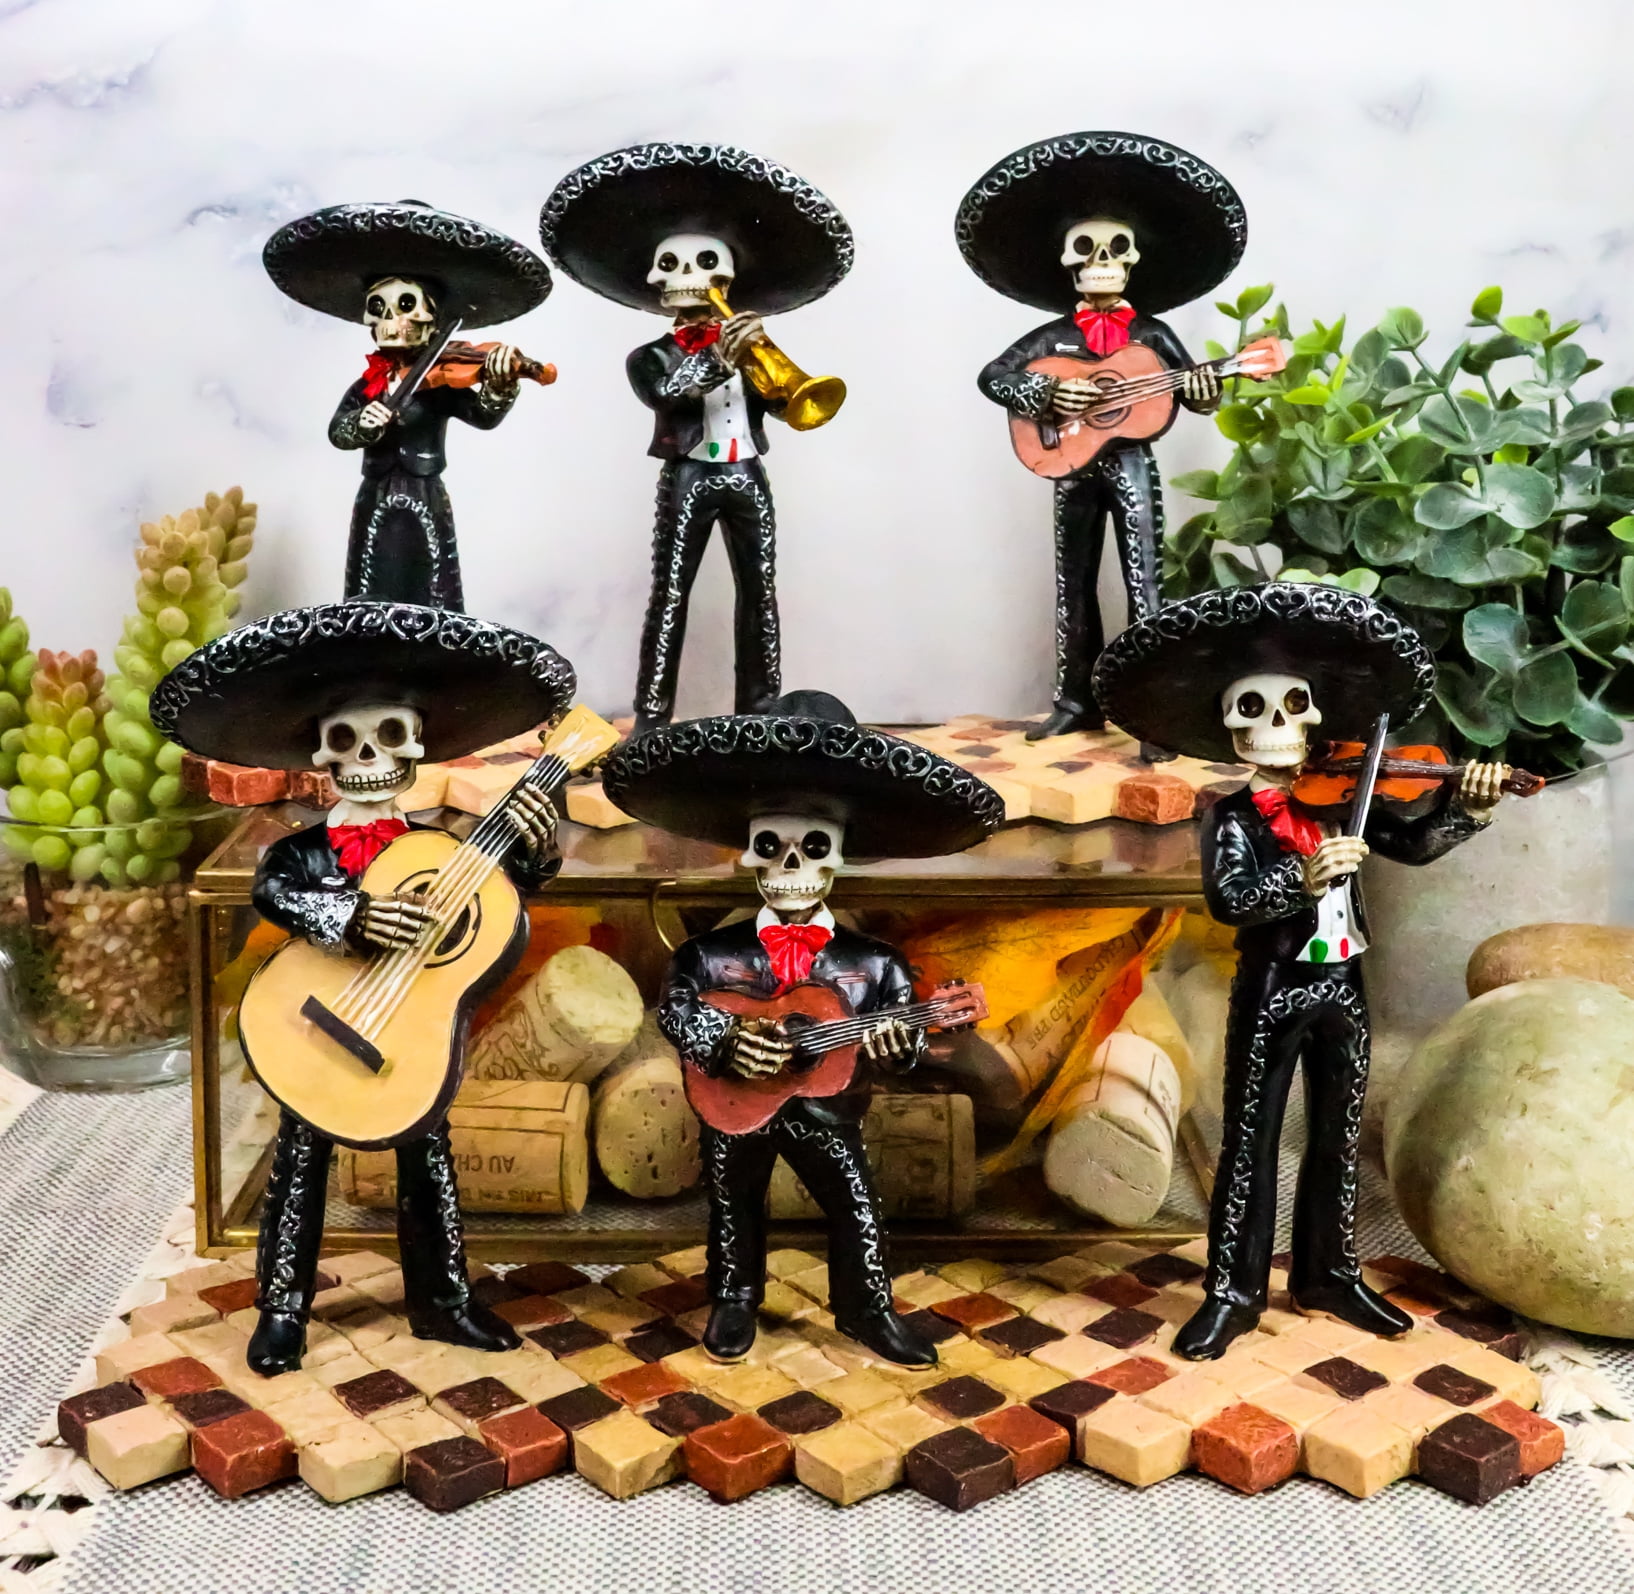 Day Of The Dead Black Mariachi Band Folk Musician Skeleton Figurines Set of  6 